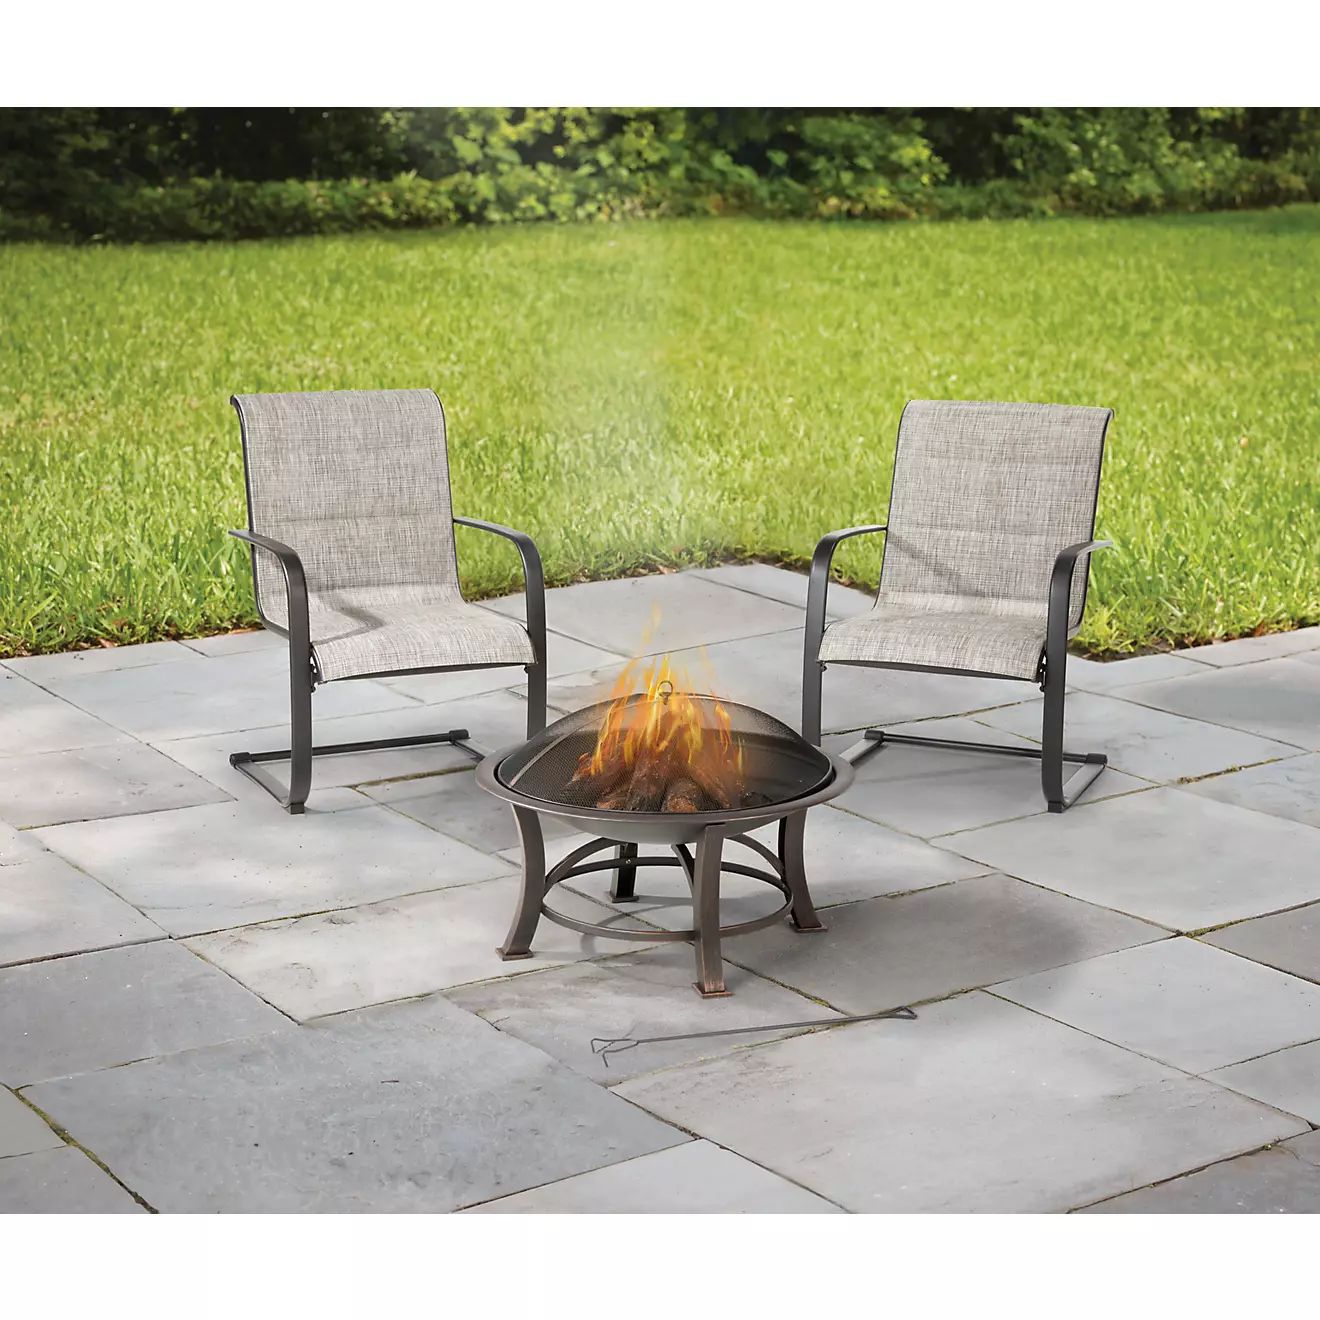 Mosaic 30 in Vera Fire Pit | Academy Sports + Outdoors